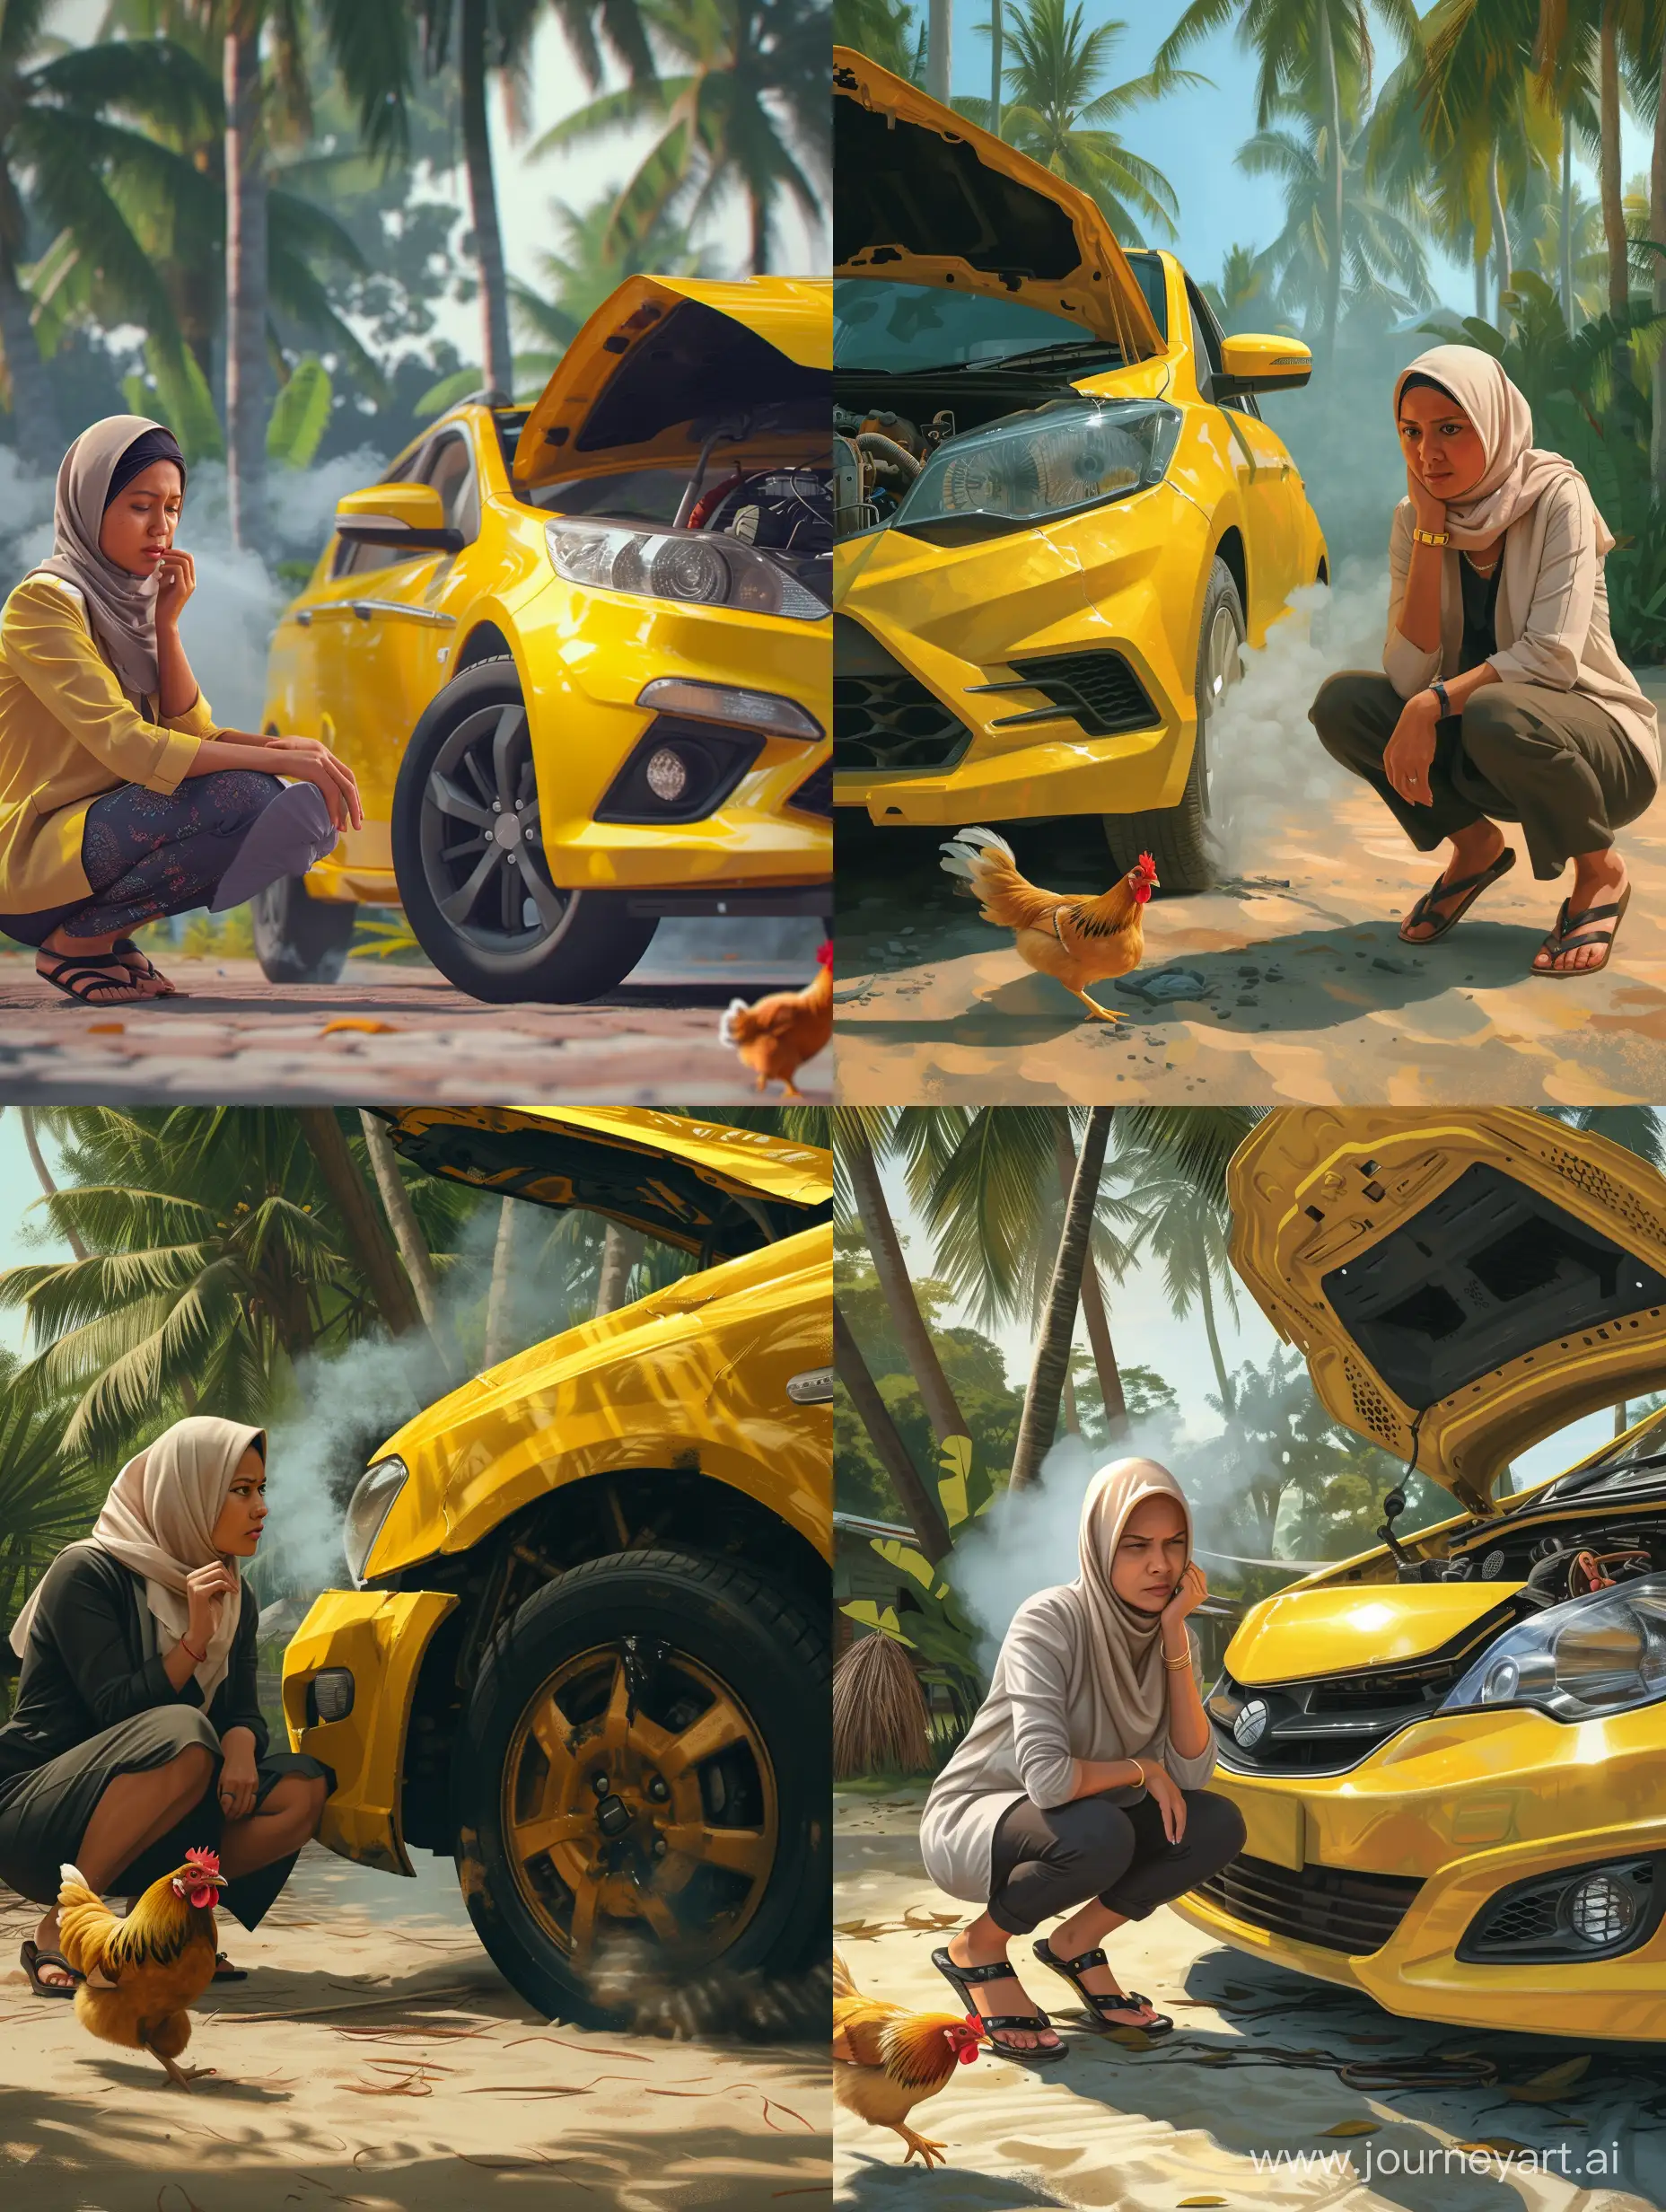 ultra realistic, close up,a Malay woman in office clothes, sandals and wearing a hijab, squats next to her broken-down car. The front bonnet was open and there was smoke coming out of the car engine. Proton brand car made in Malaysia is yellow. refraction of the morning sun. the background of coconut trees and the atmosphere of a Malay village. There is a chicken running